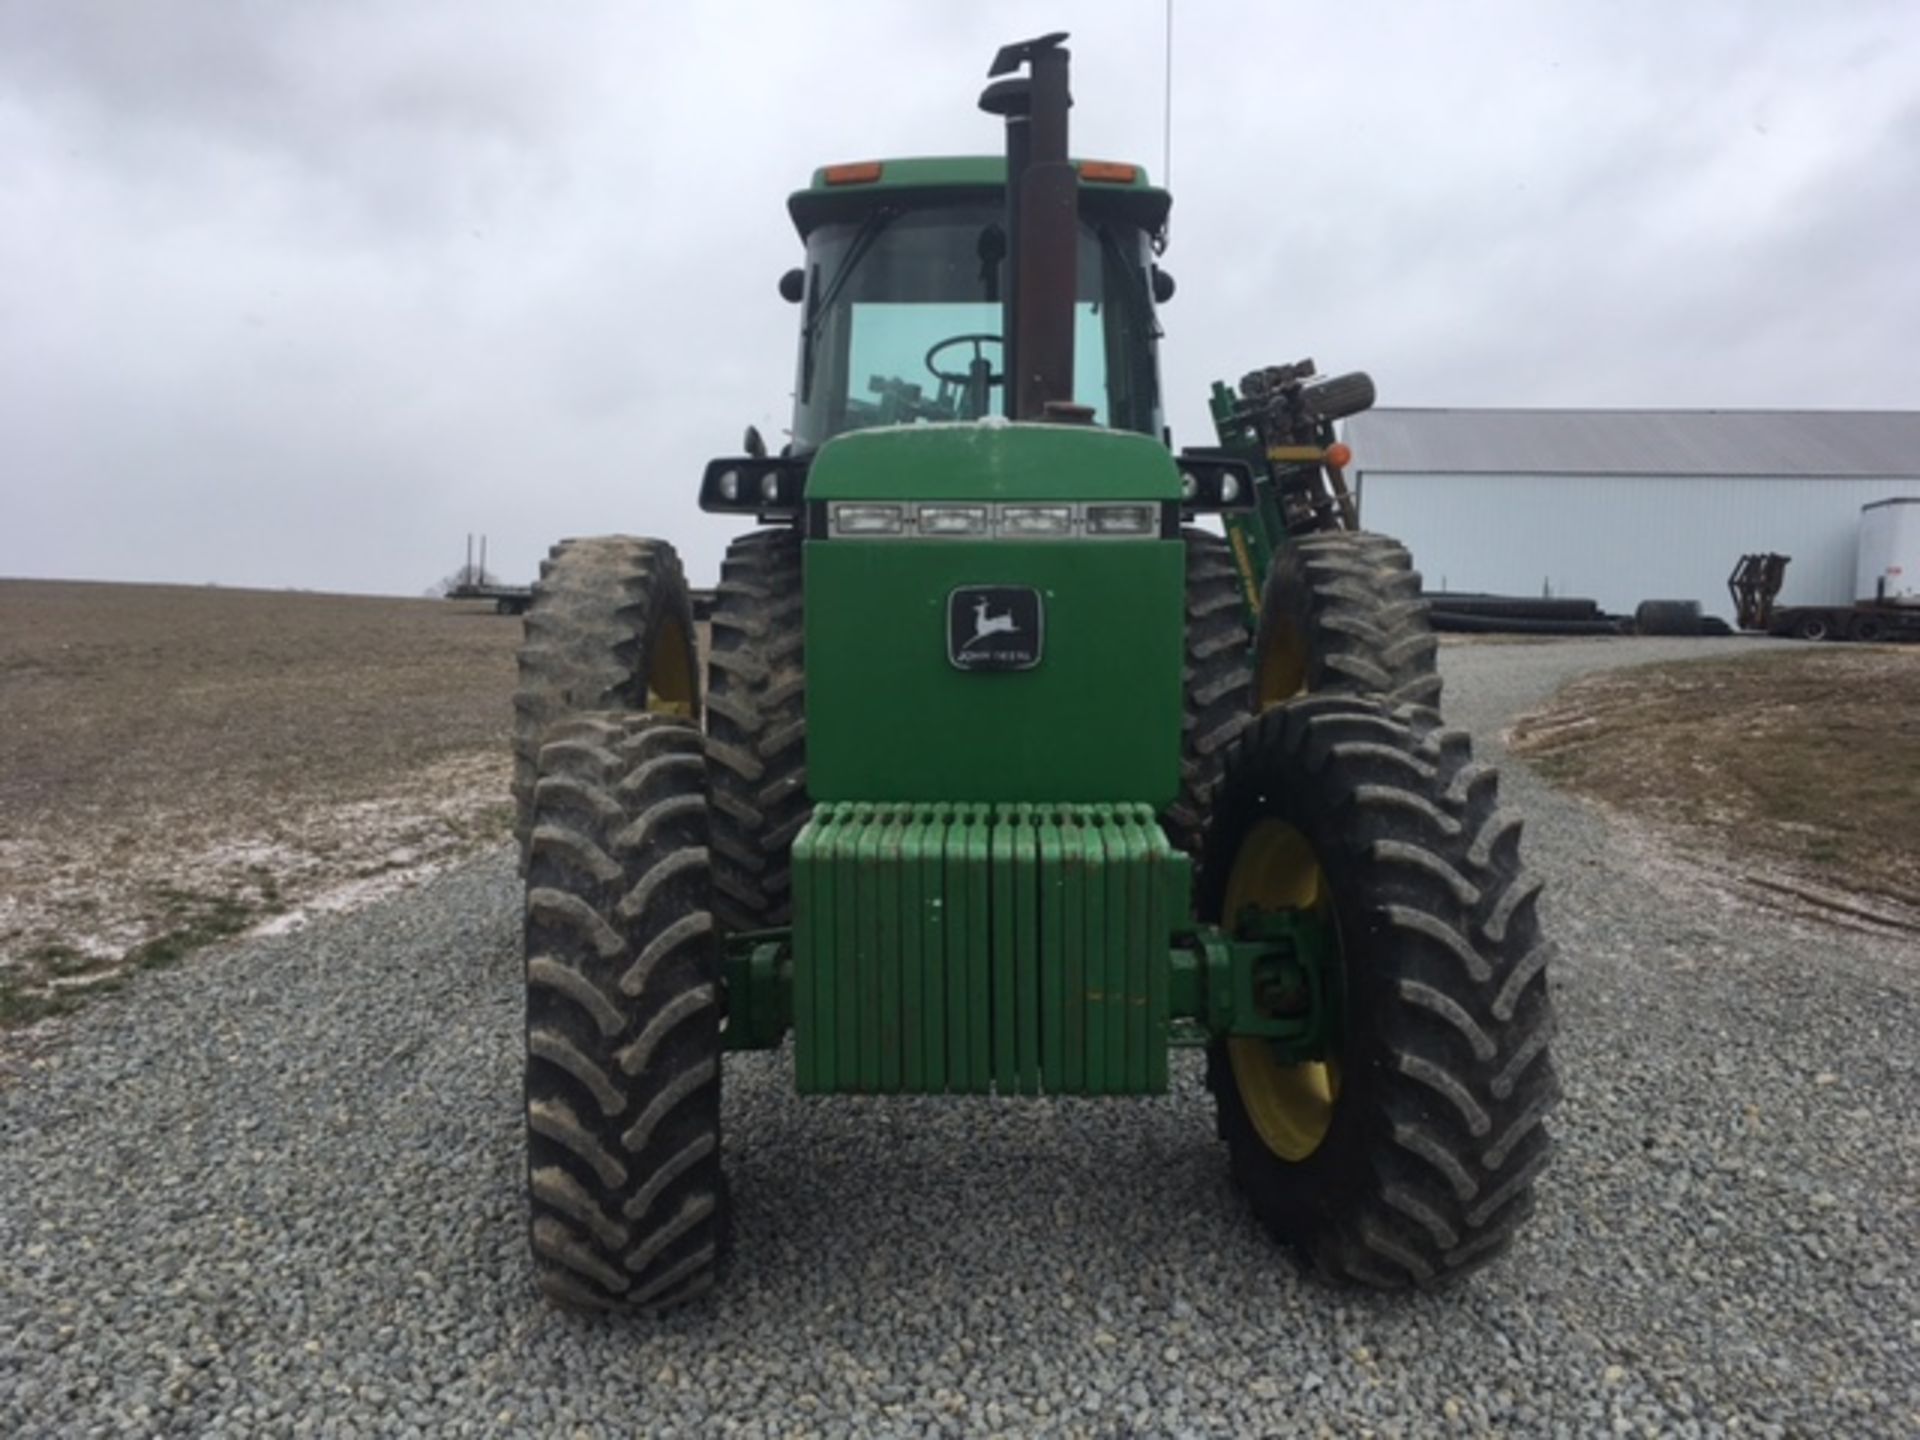 John Deere 4555 Tractor, MFWD, weights, duals, 15 speed powershift, 3pt., 3 hyd. remotes, big 1000 - Image 9 of 13